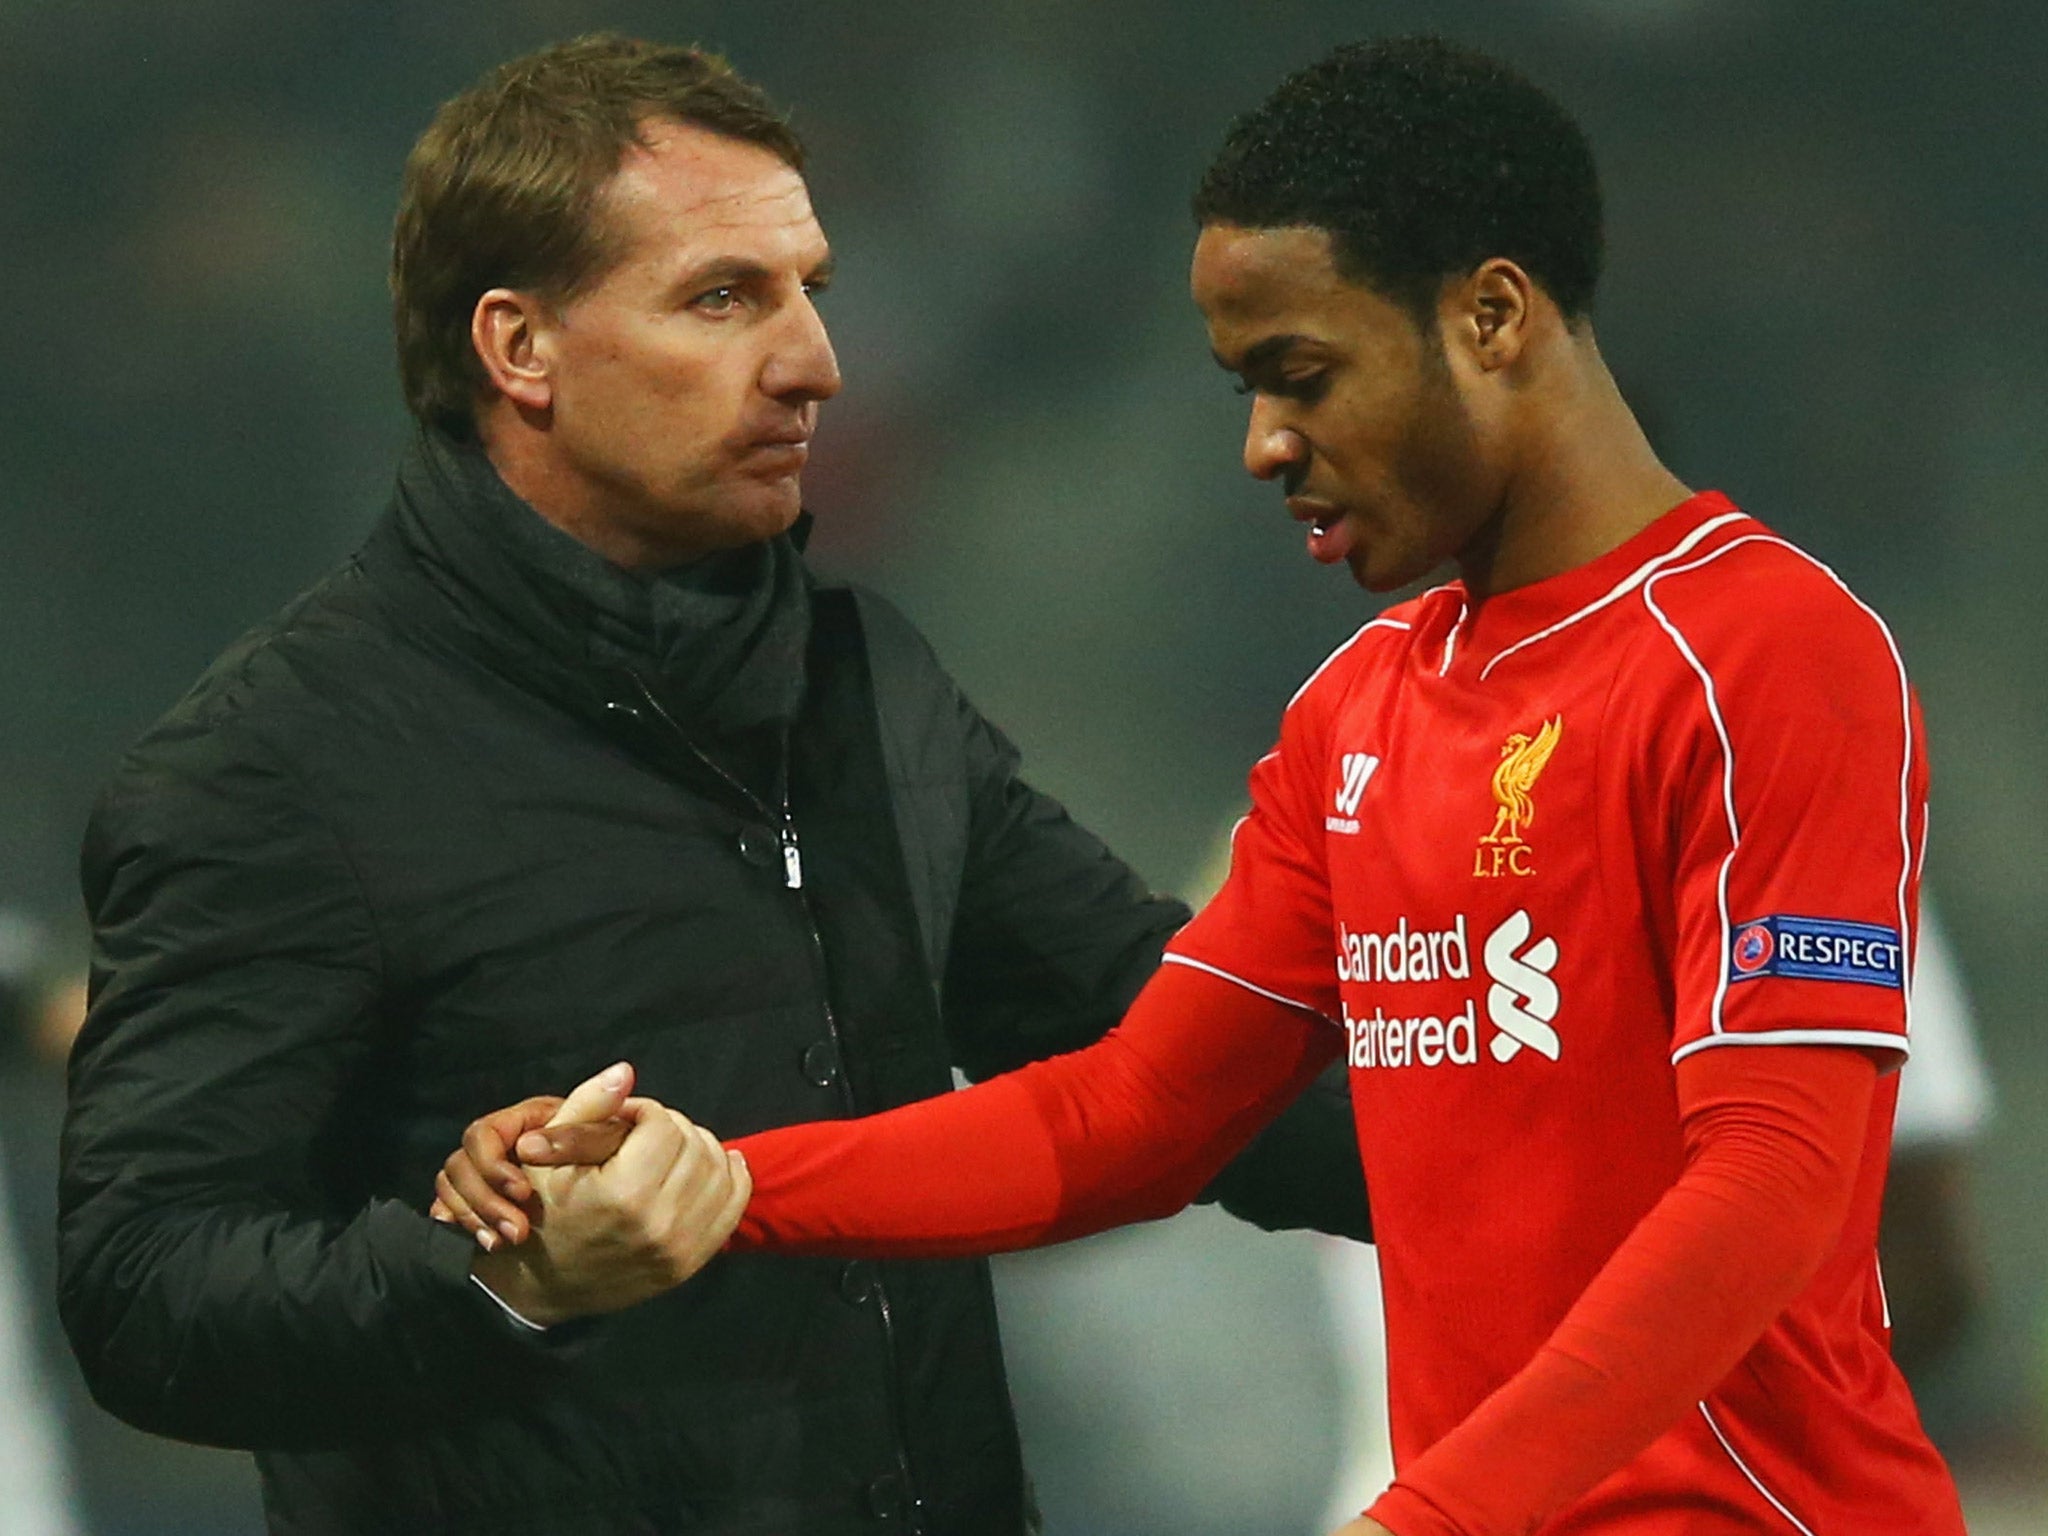 Past form suggests Liverpool's owners will back Brendan Rodgers' refusal to sell Sterling